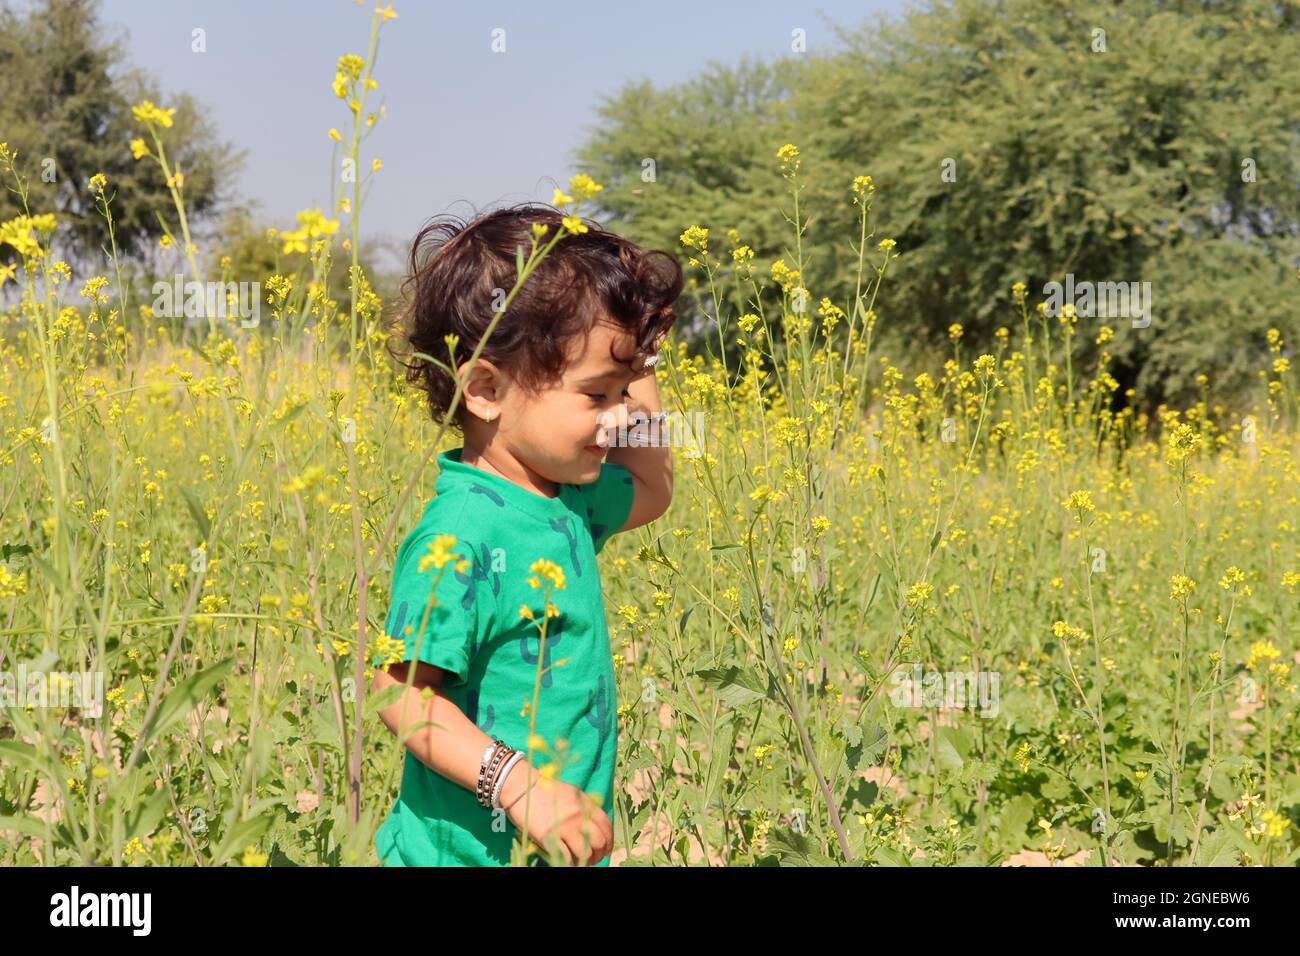 Close-up of An Indian little boy playing and running in a mustard field. A little farmer's child wearing a green shirt plays in the mustard crop Stock Photo